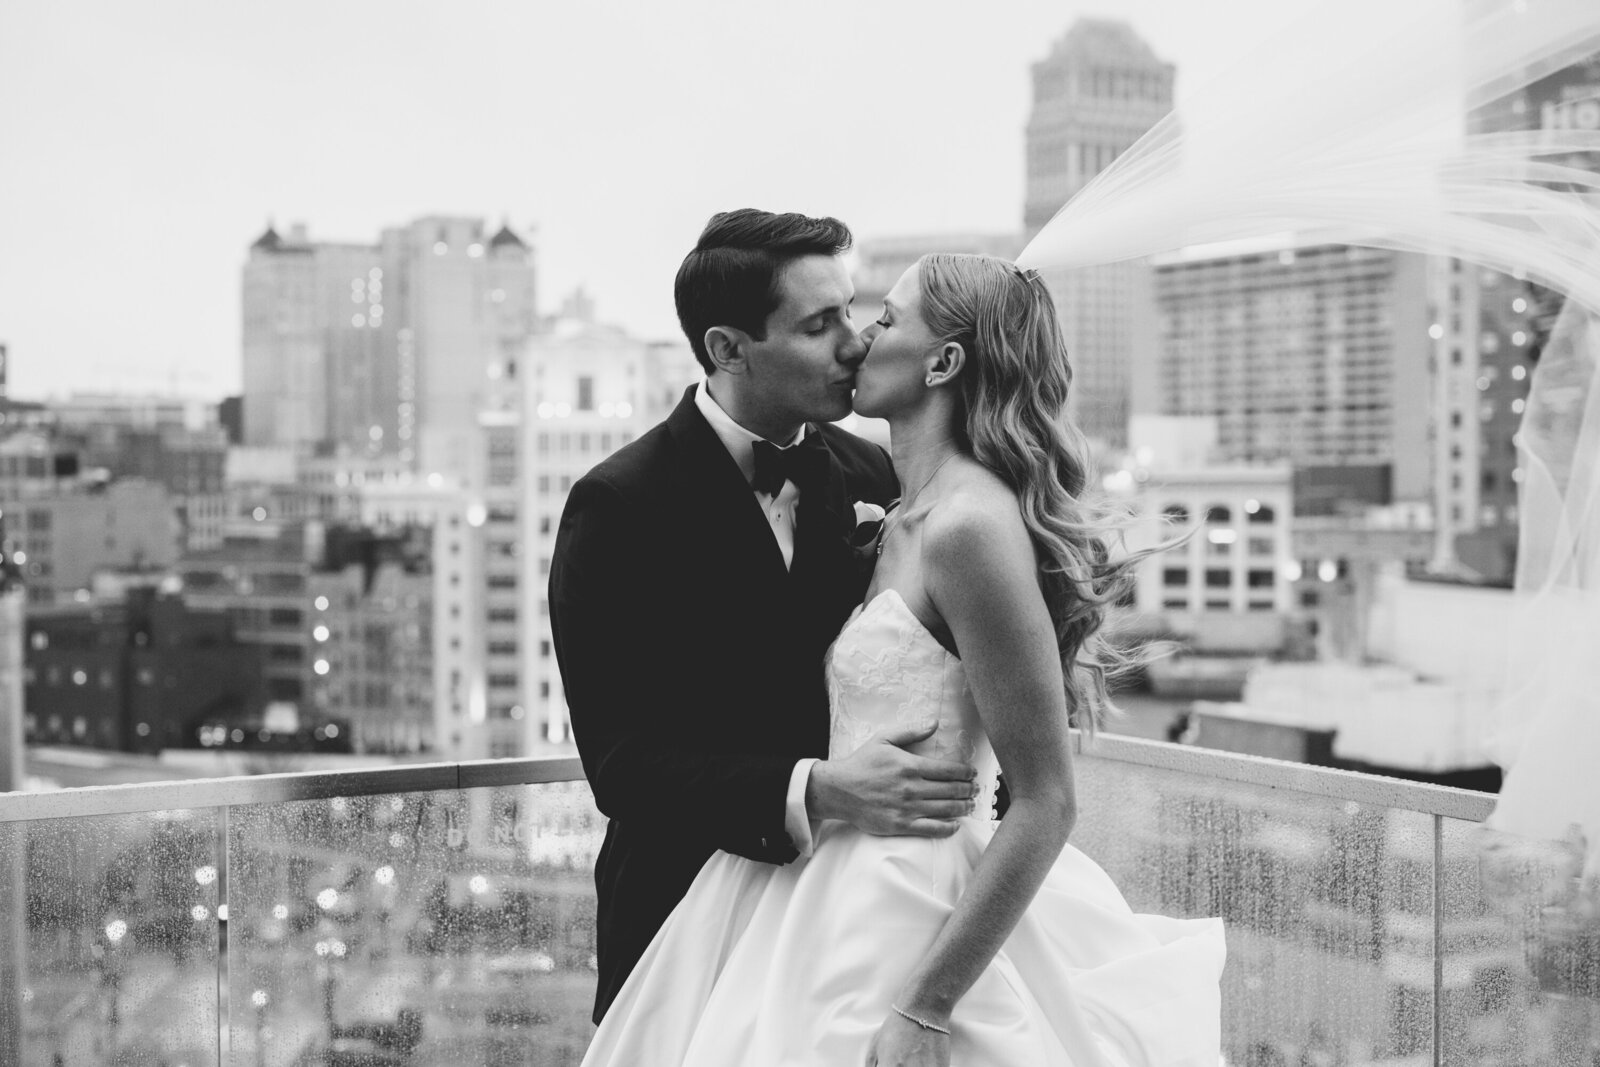 A bride and groom kiss on a rooftop overlooking philadelphia.